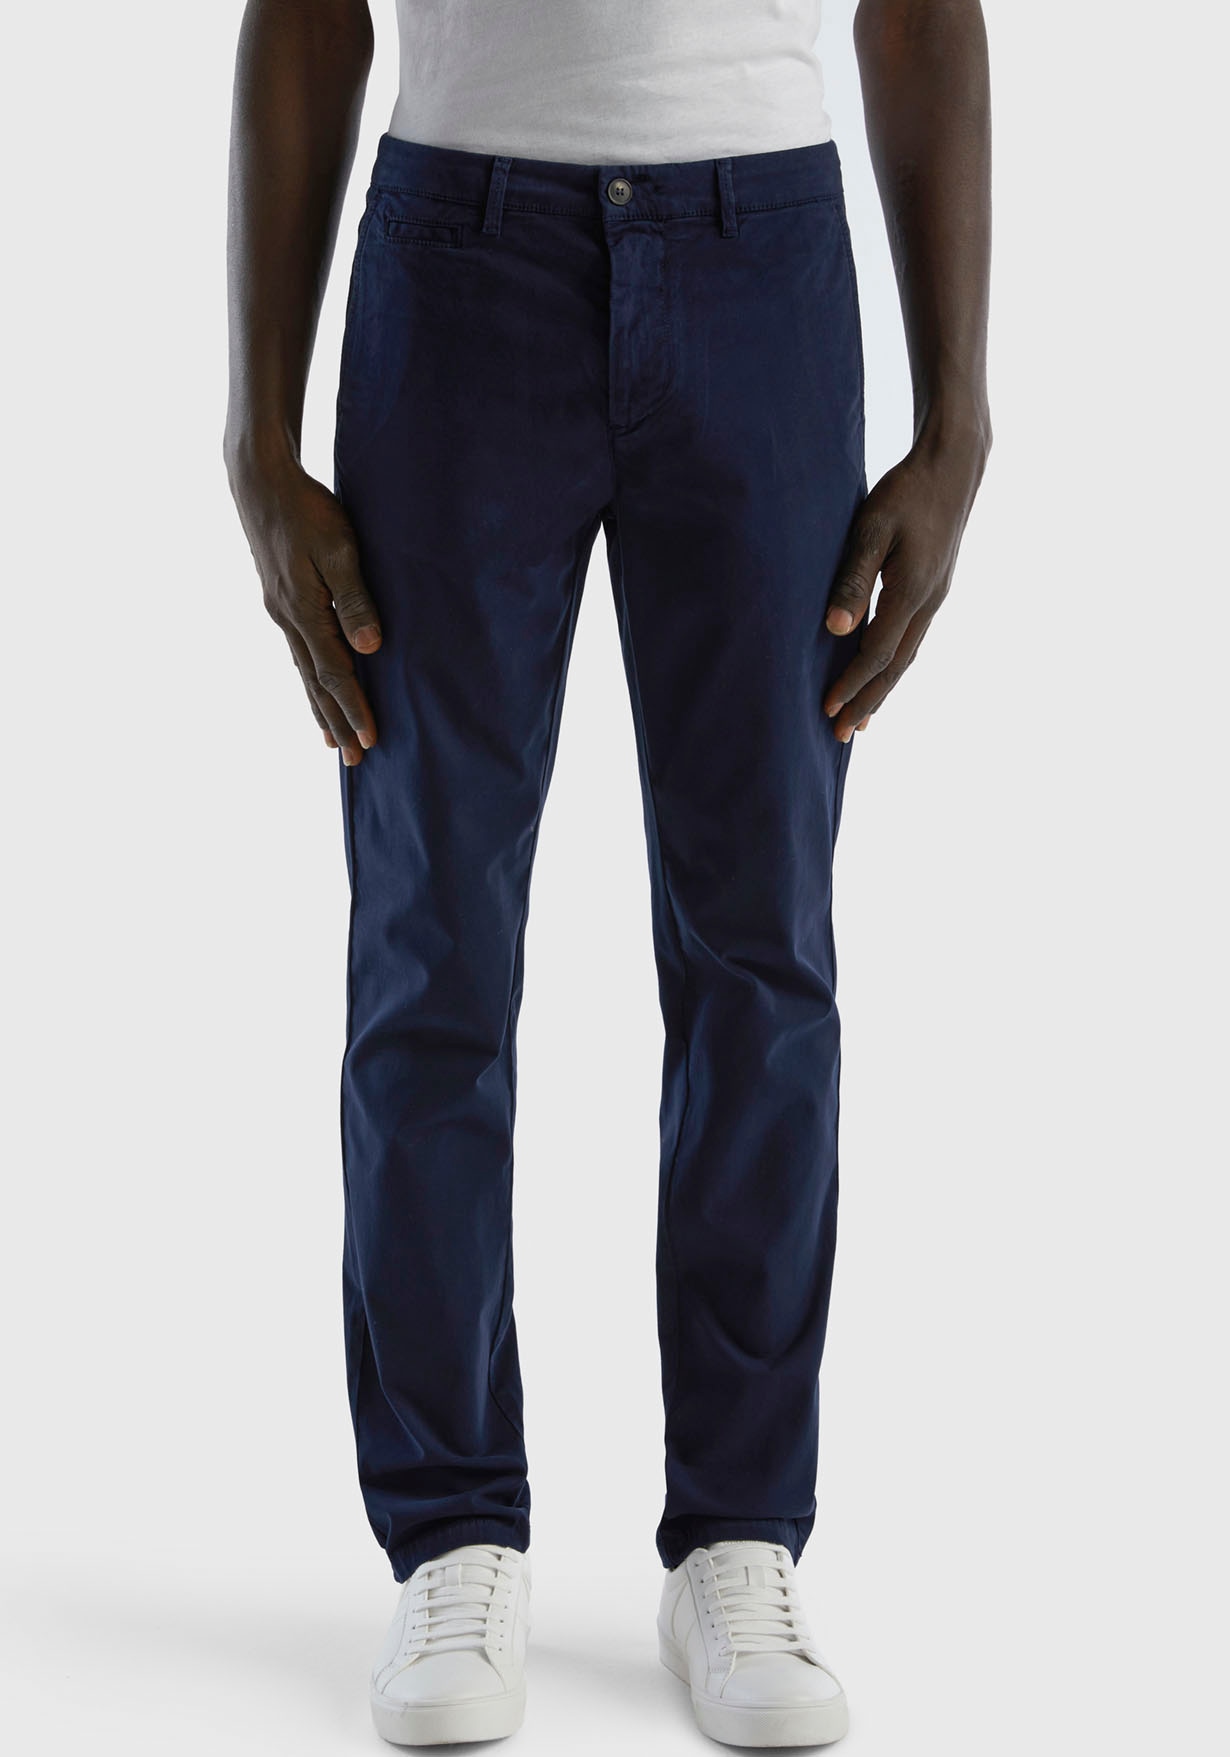 United Colors of Benetton Chinohose, im klassischen Chino-Look von United Colors of Benetton